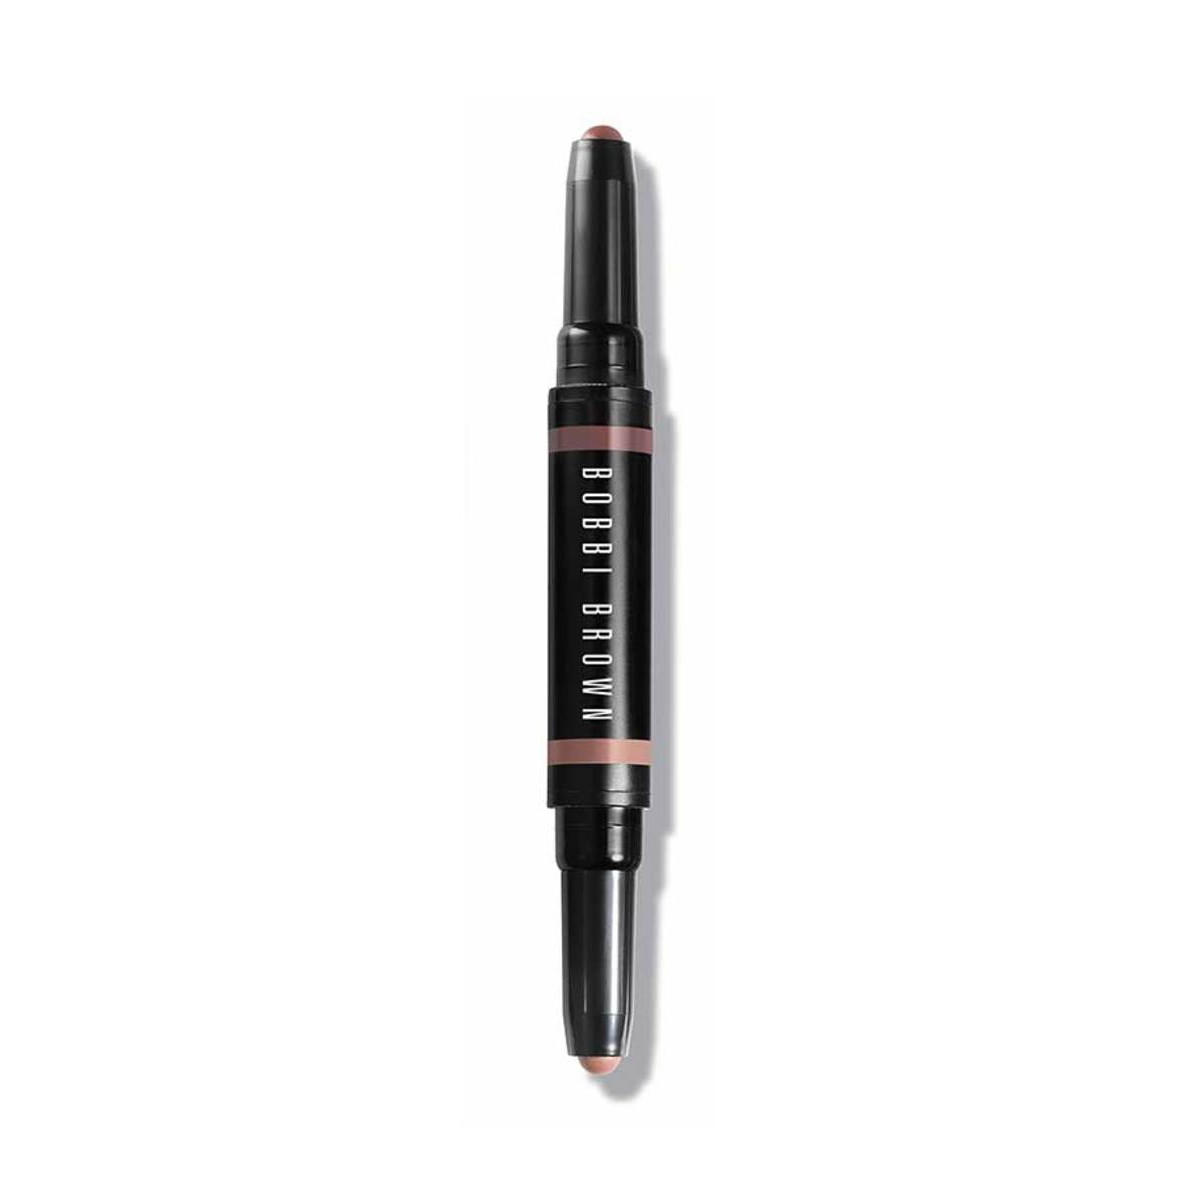 Bobbi Brown Dual-Ended Long-Wear Cream Shadow Stick Dusty Mauve / Malted Pink